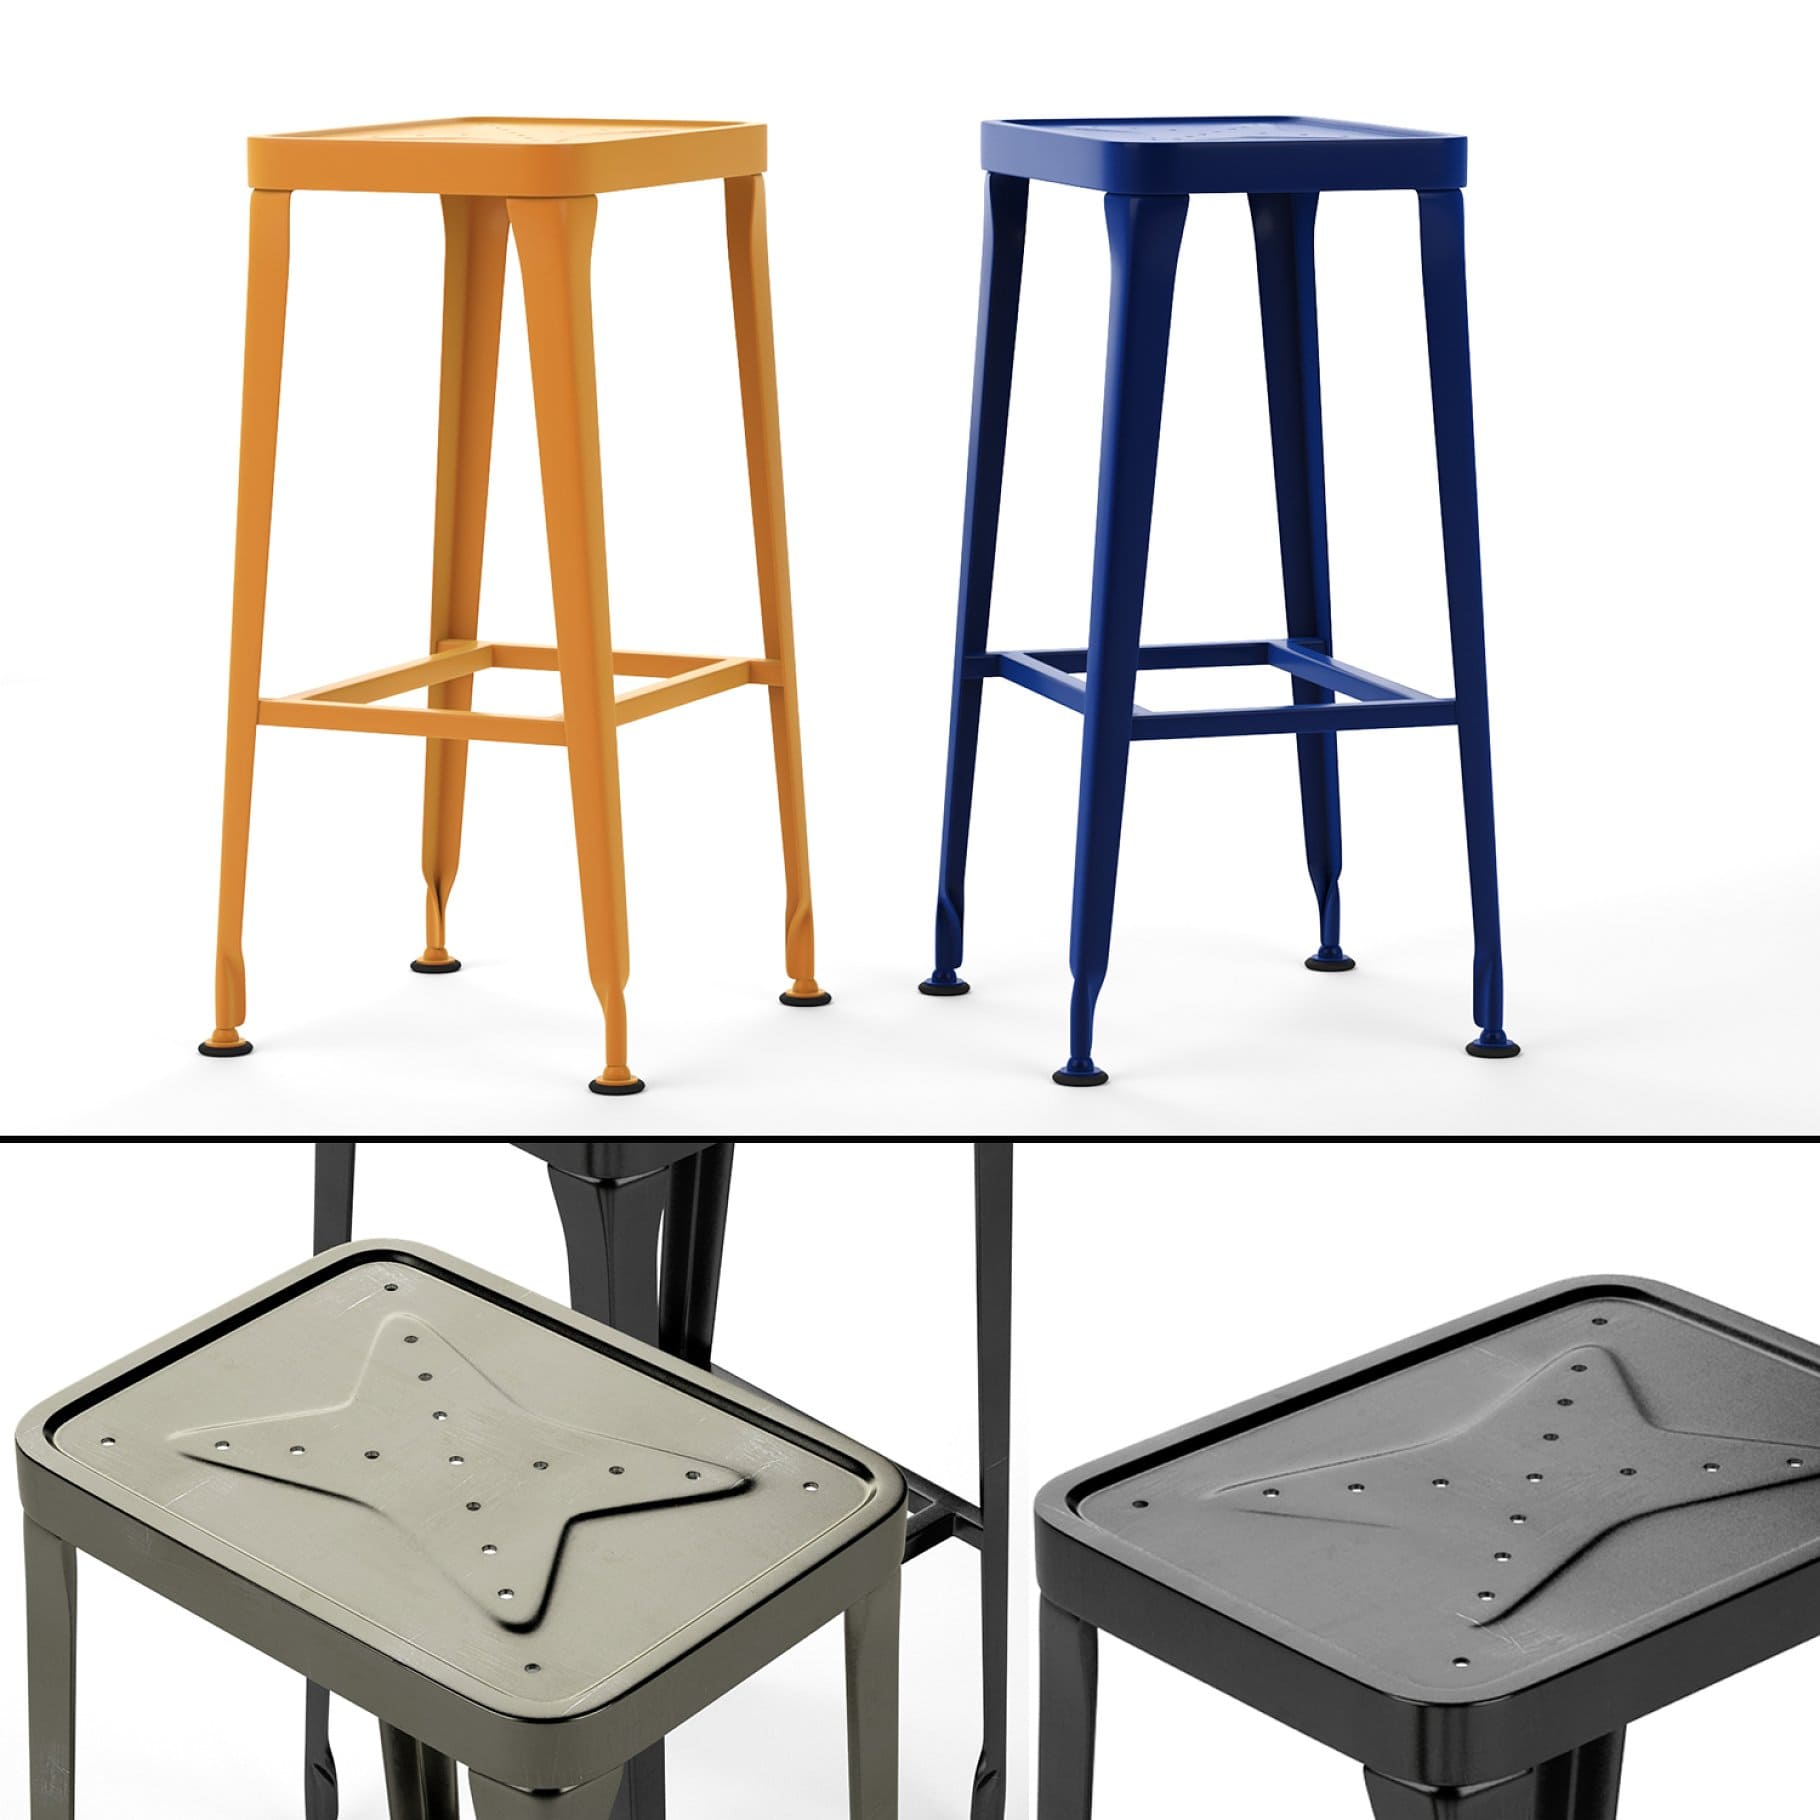 Carbon Bar Stool on a white background.